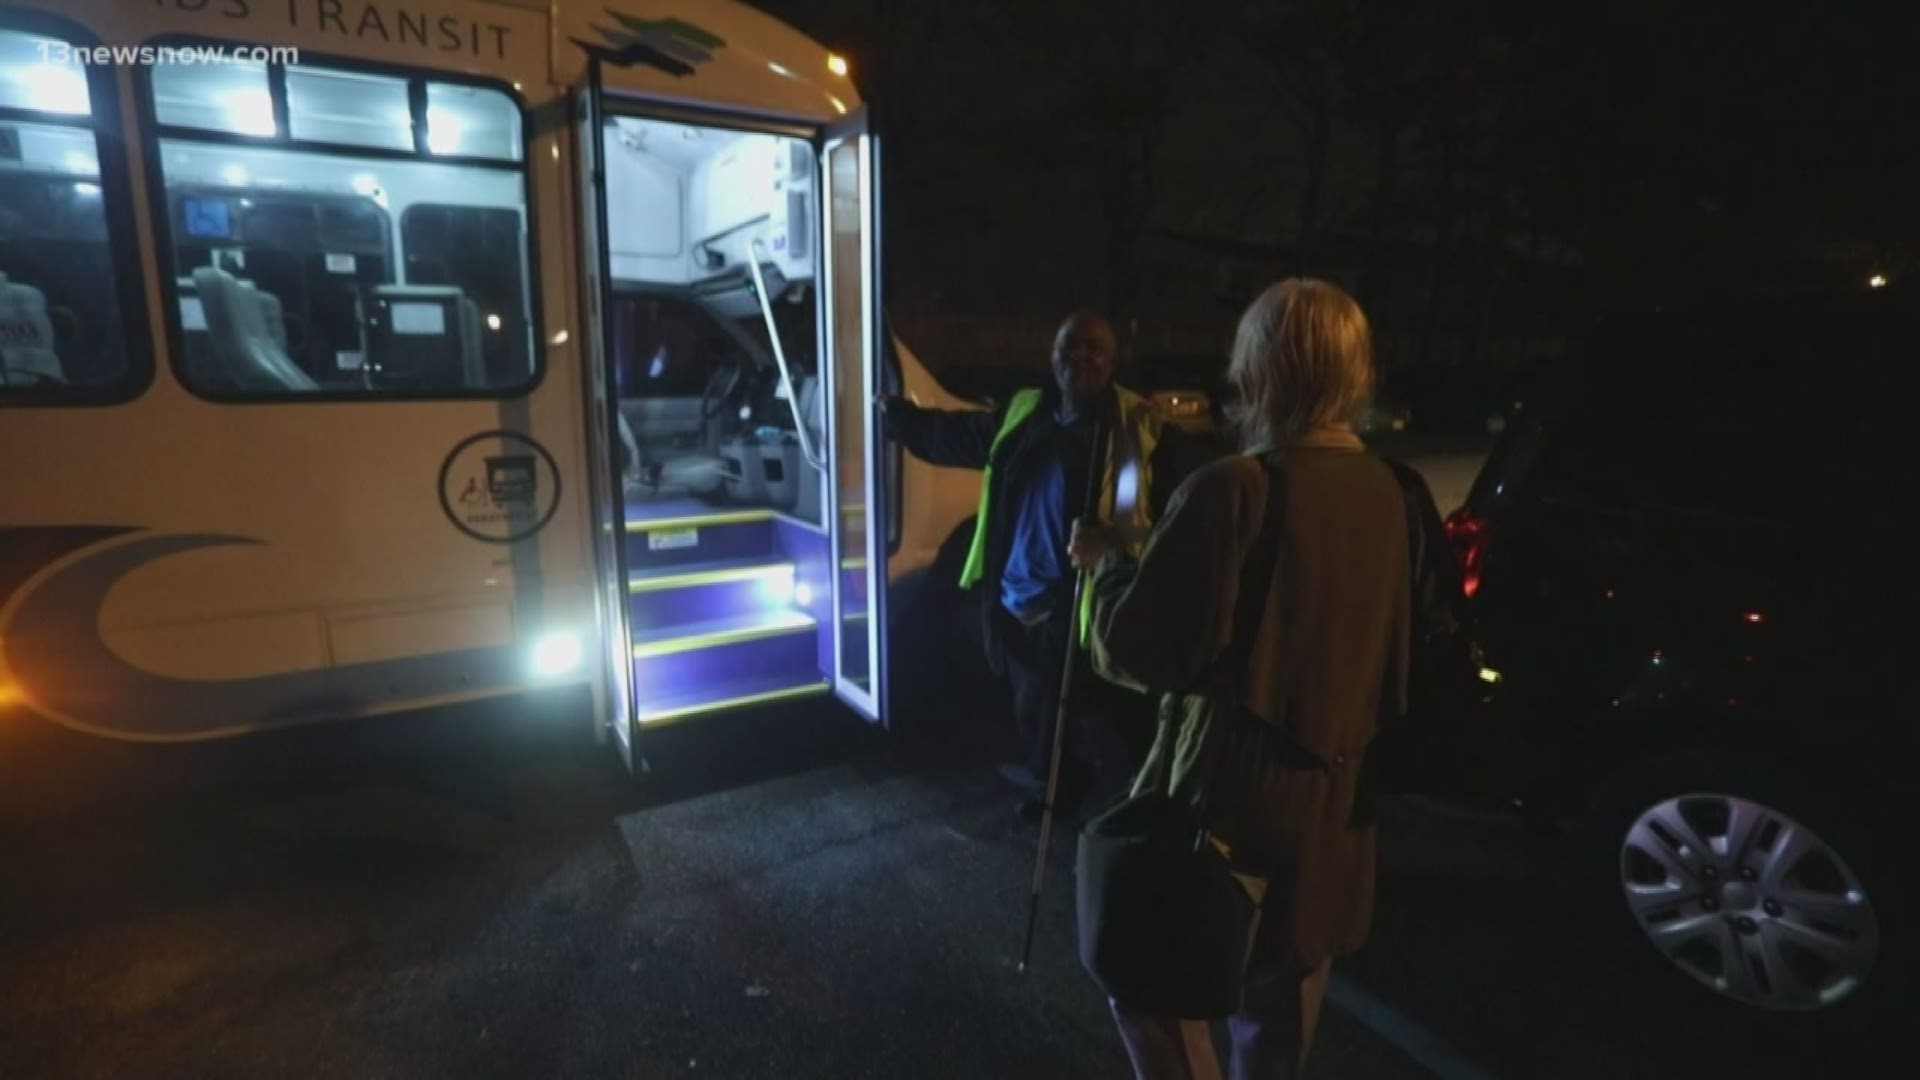 Starting this month, a new company - Via - took charge of paratransit services for Hampton Roads Transit. Riders say they're experiencing unacceptable problems.